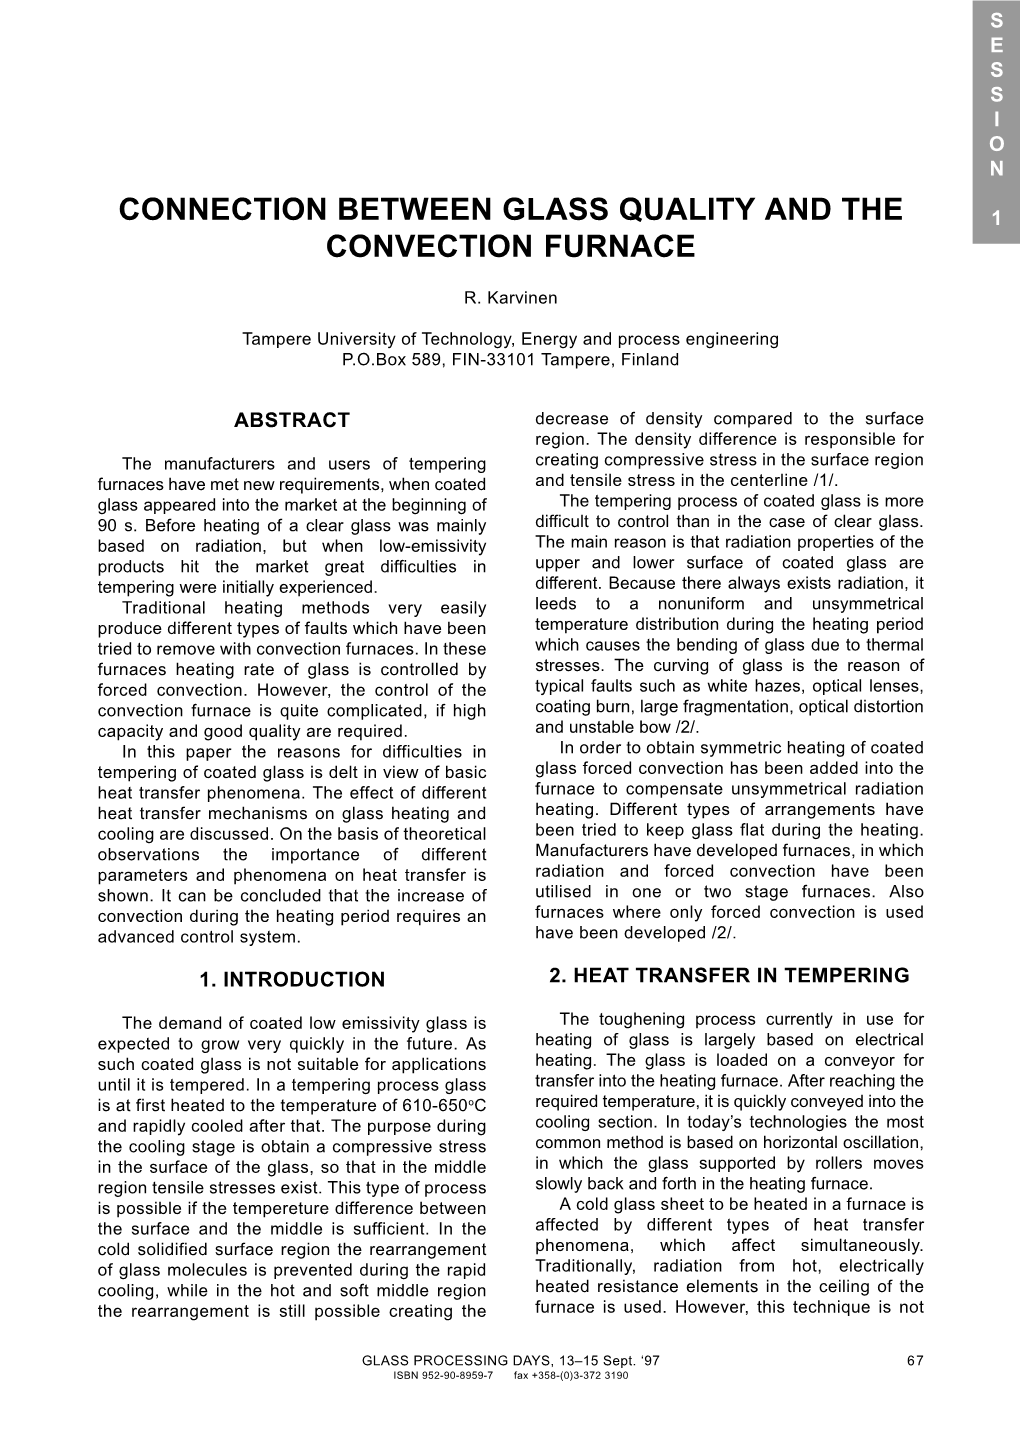 Connection Between Glass Quality and the Convection